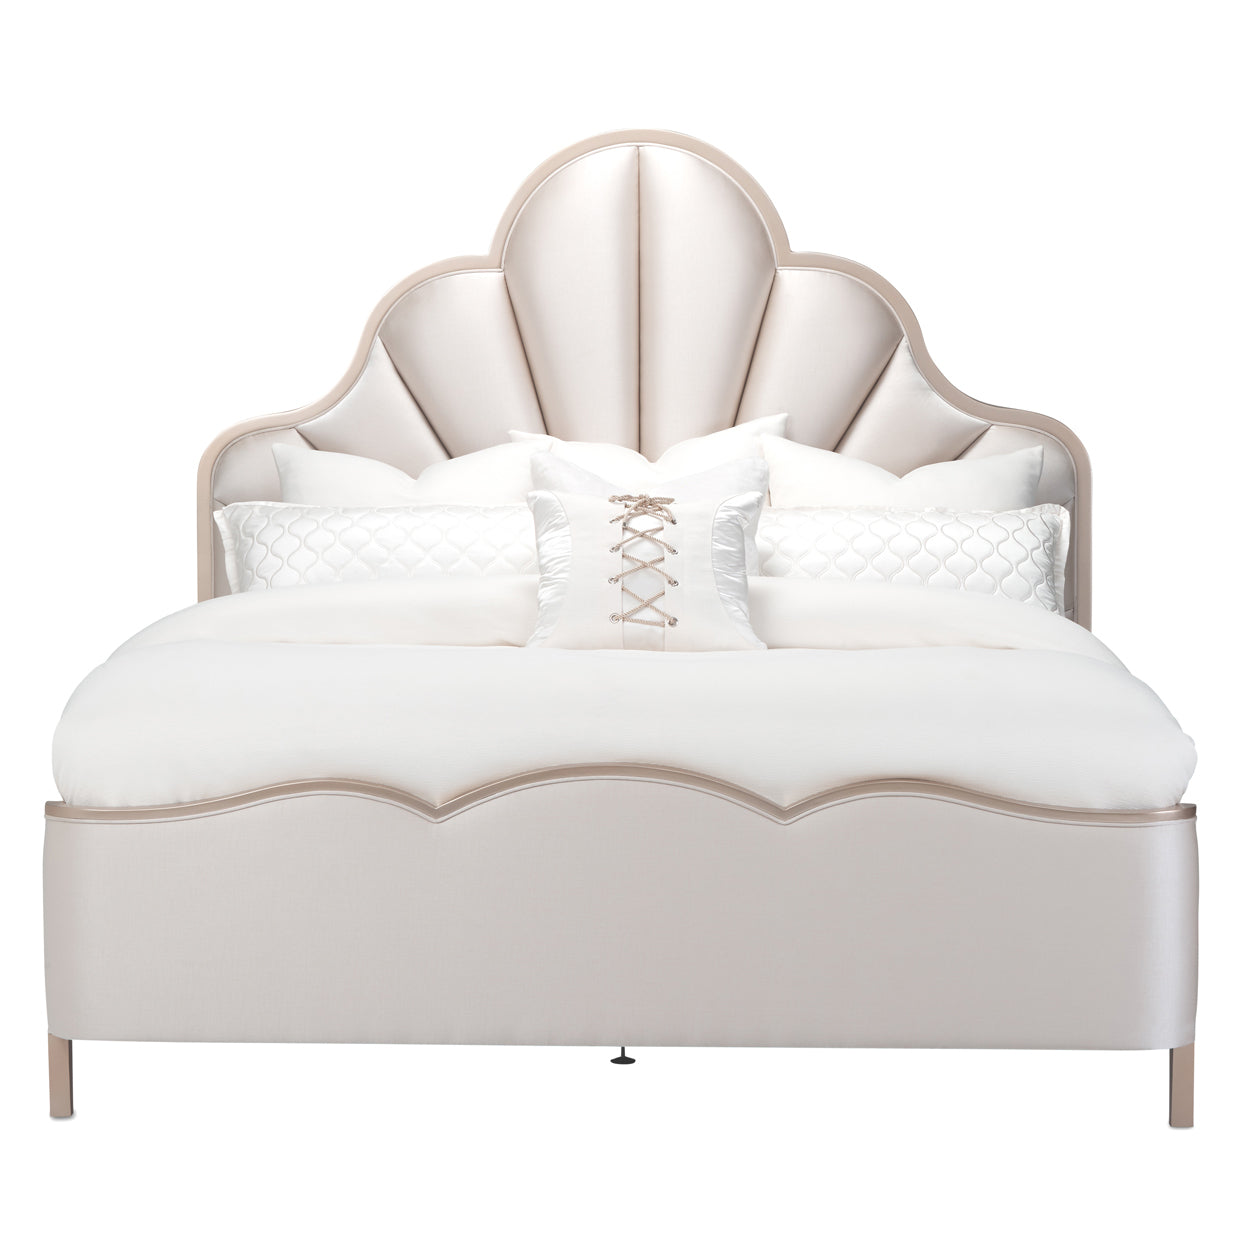 Cal King Scalloped Panel Bed, Malibu Crest Scalloped Panel Bed, Curved fan panel, headboard, USB chargers, Silky paneling, Scalloped channel fan design, Faux silk, upholstery, Porcelain color, Footboard scalloped trim, Chardonnay finish, dream art, Michael amini